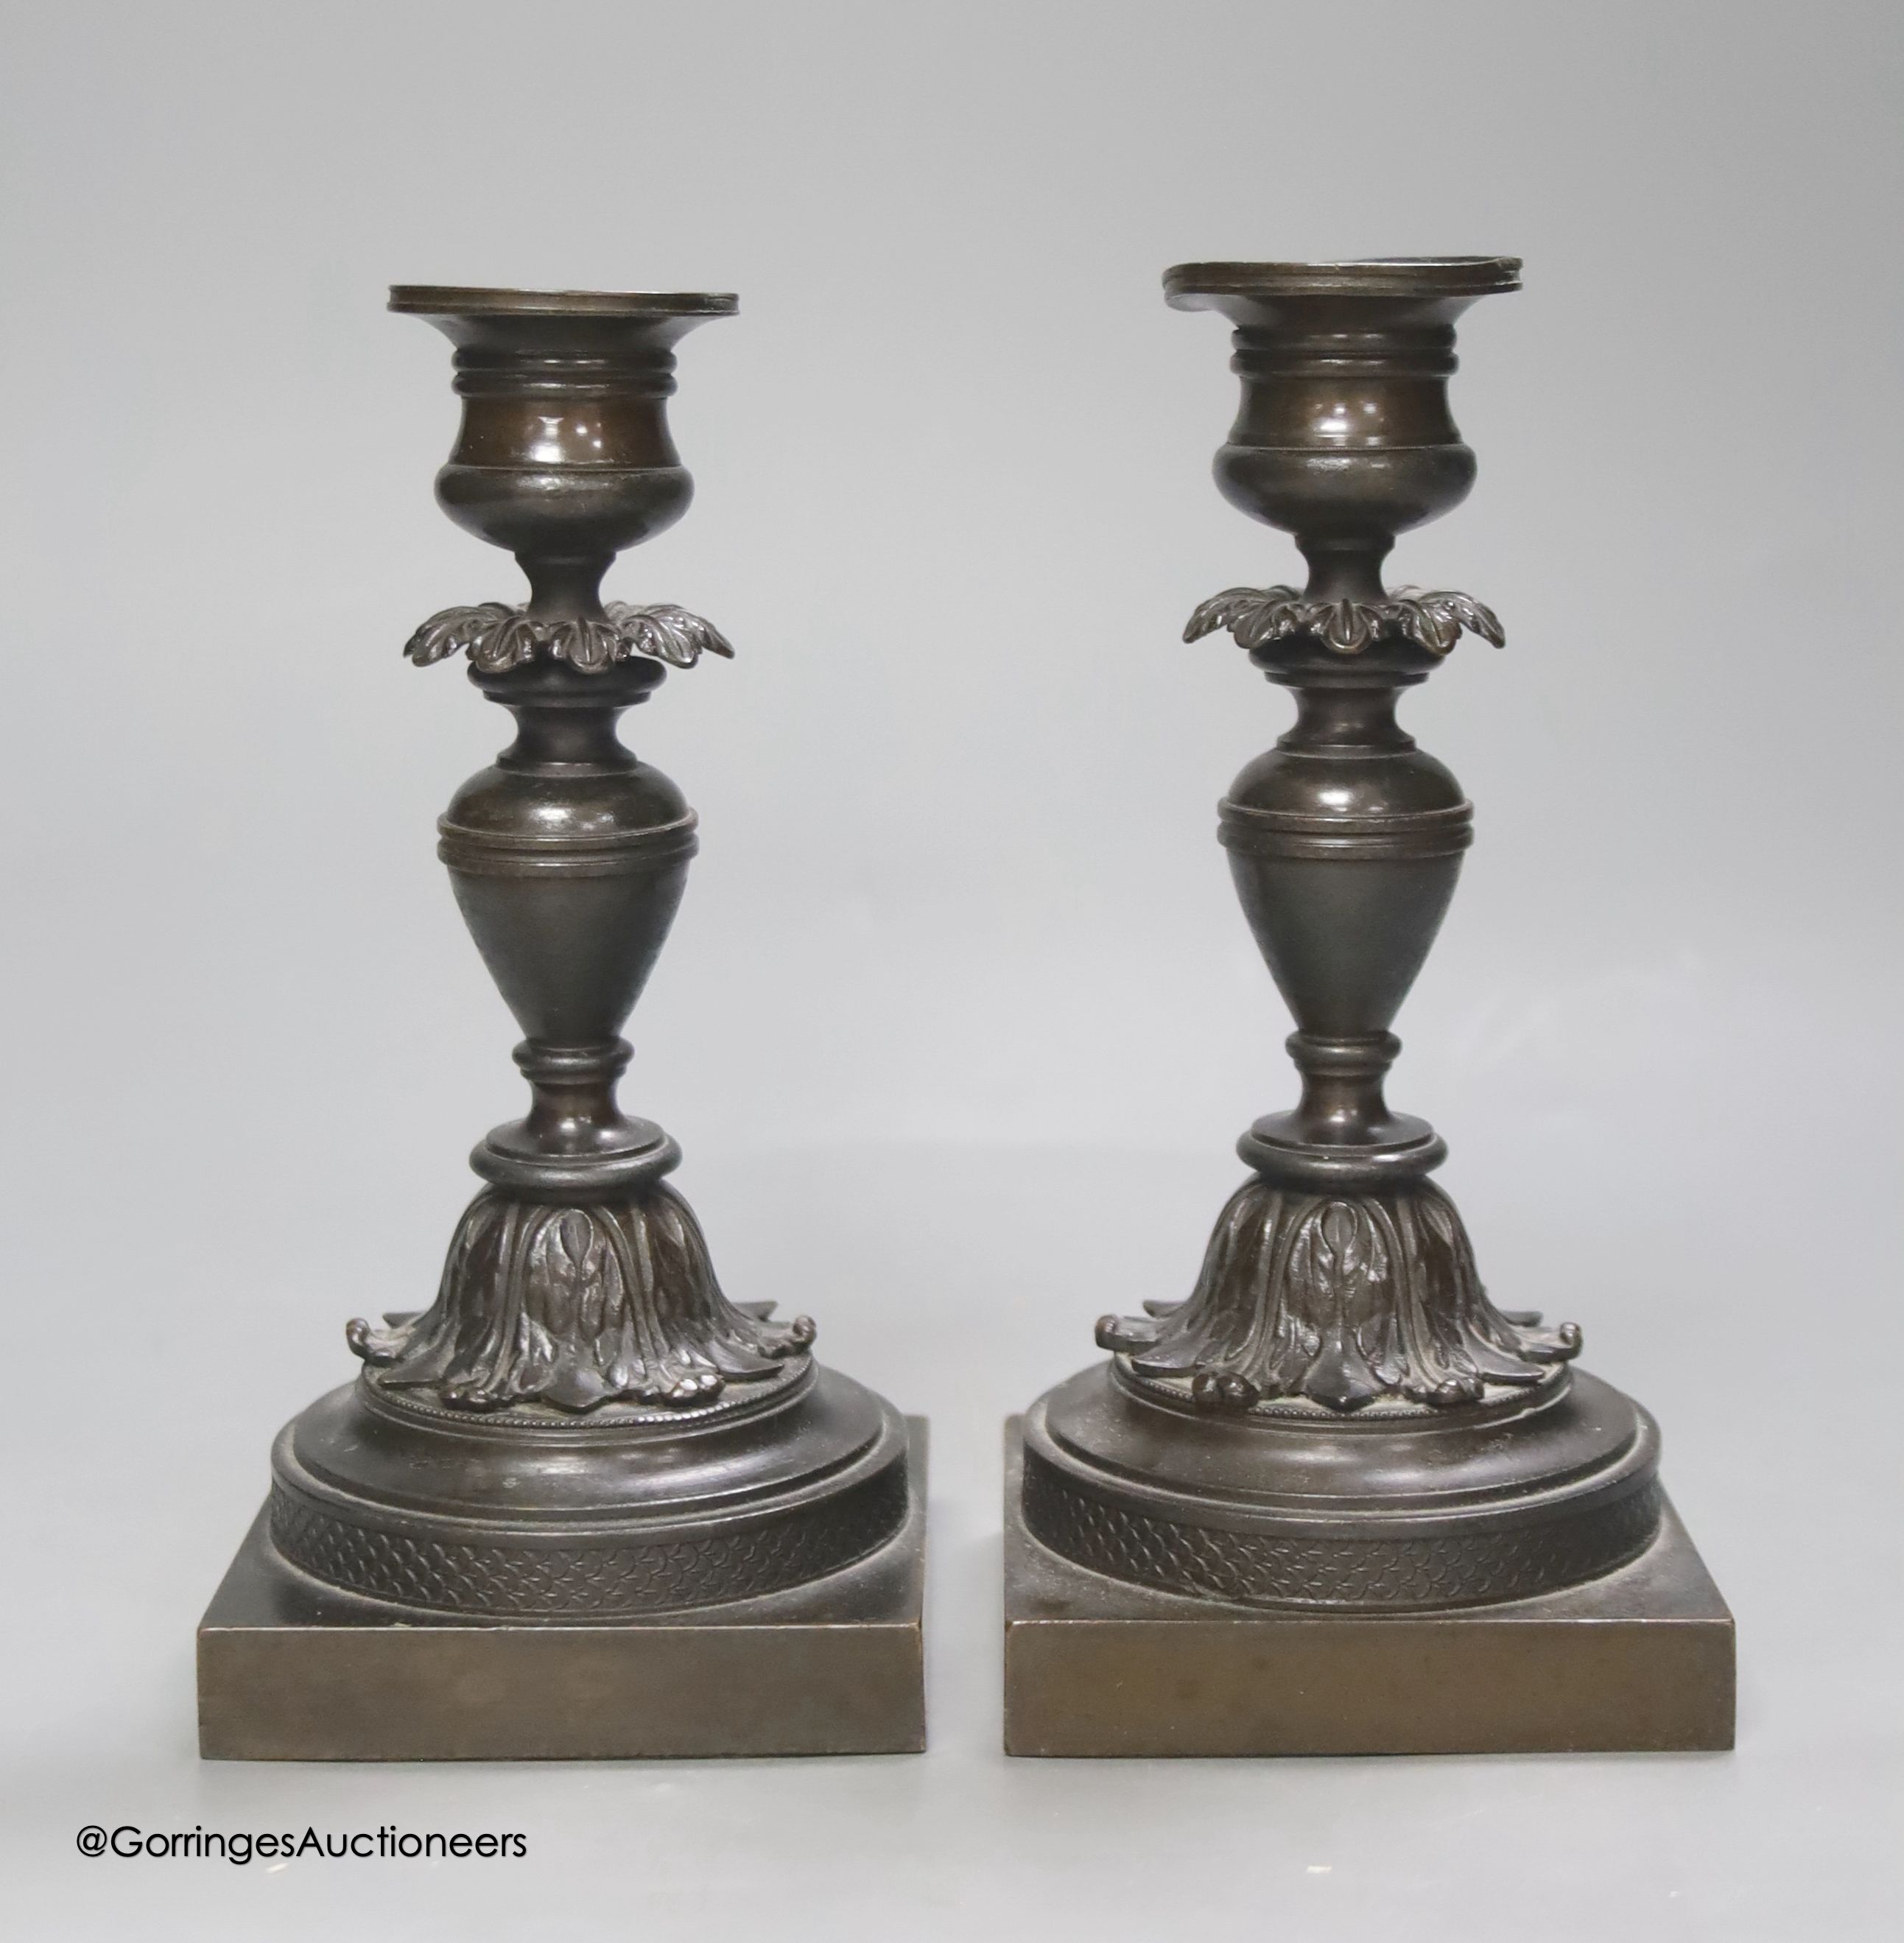 A pair of 19th century French bronze dwarf candlesticks, height 17cm